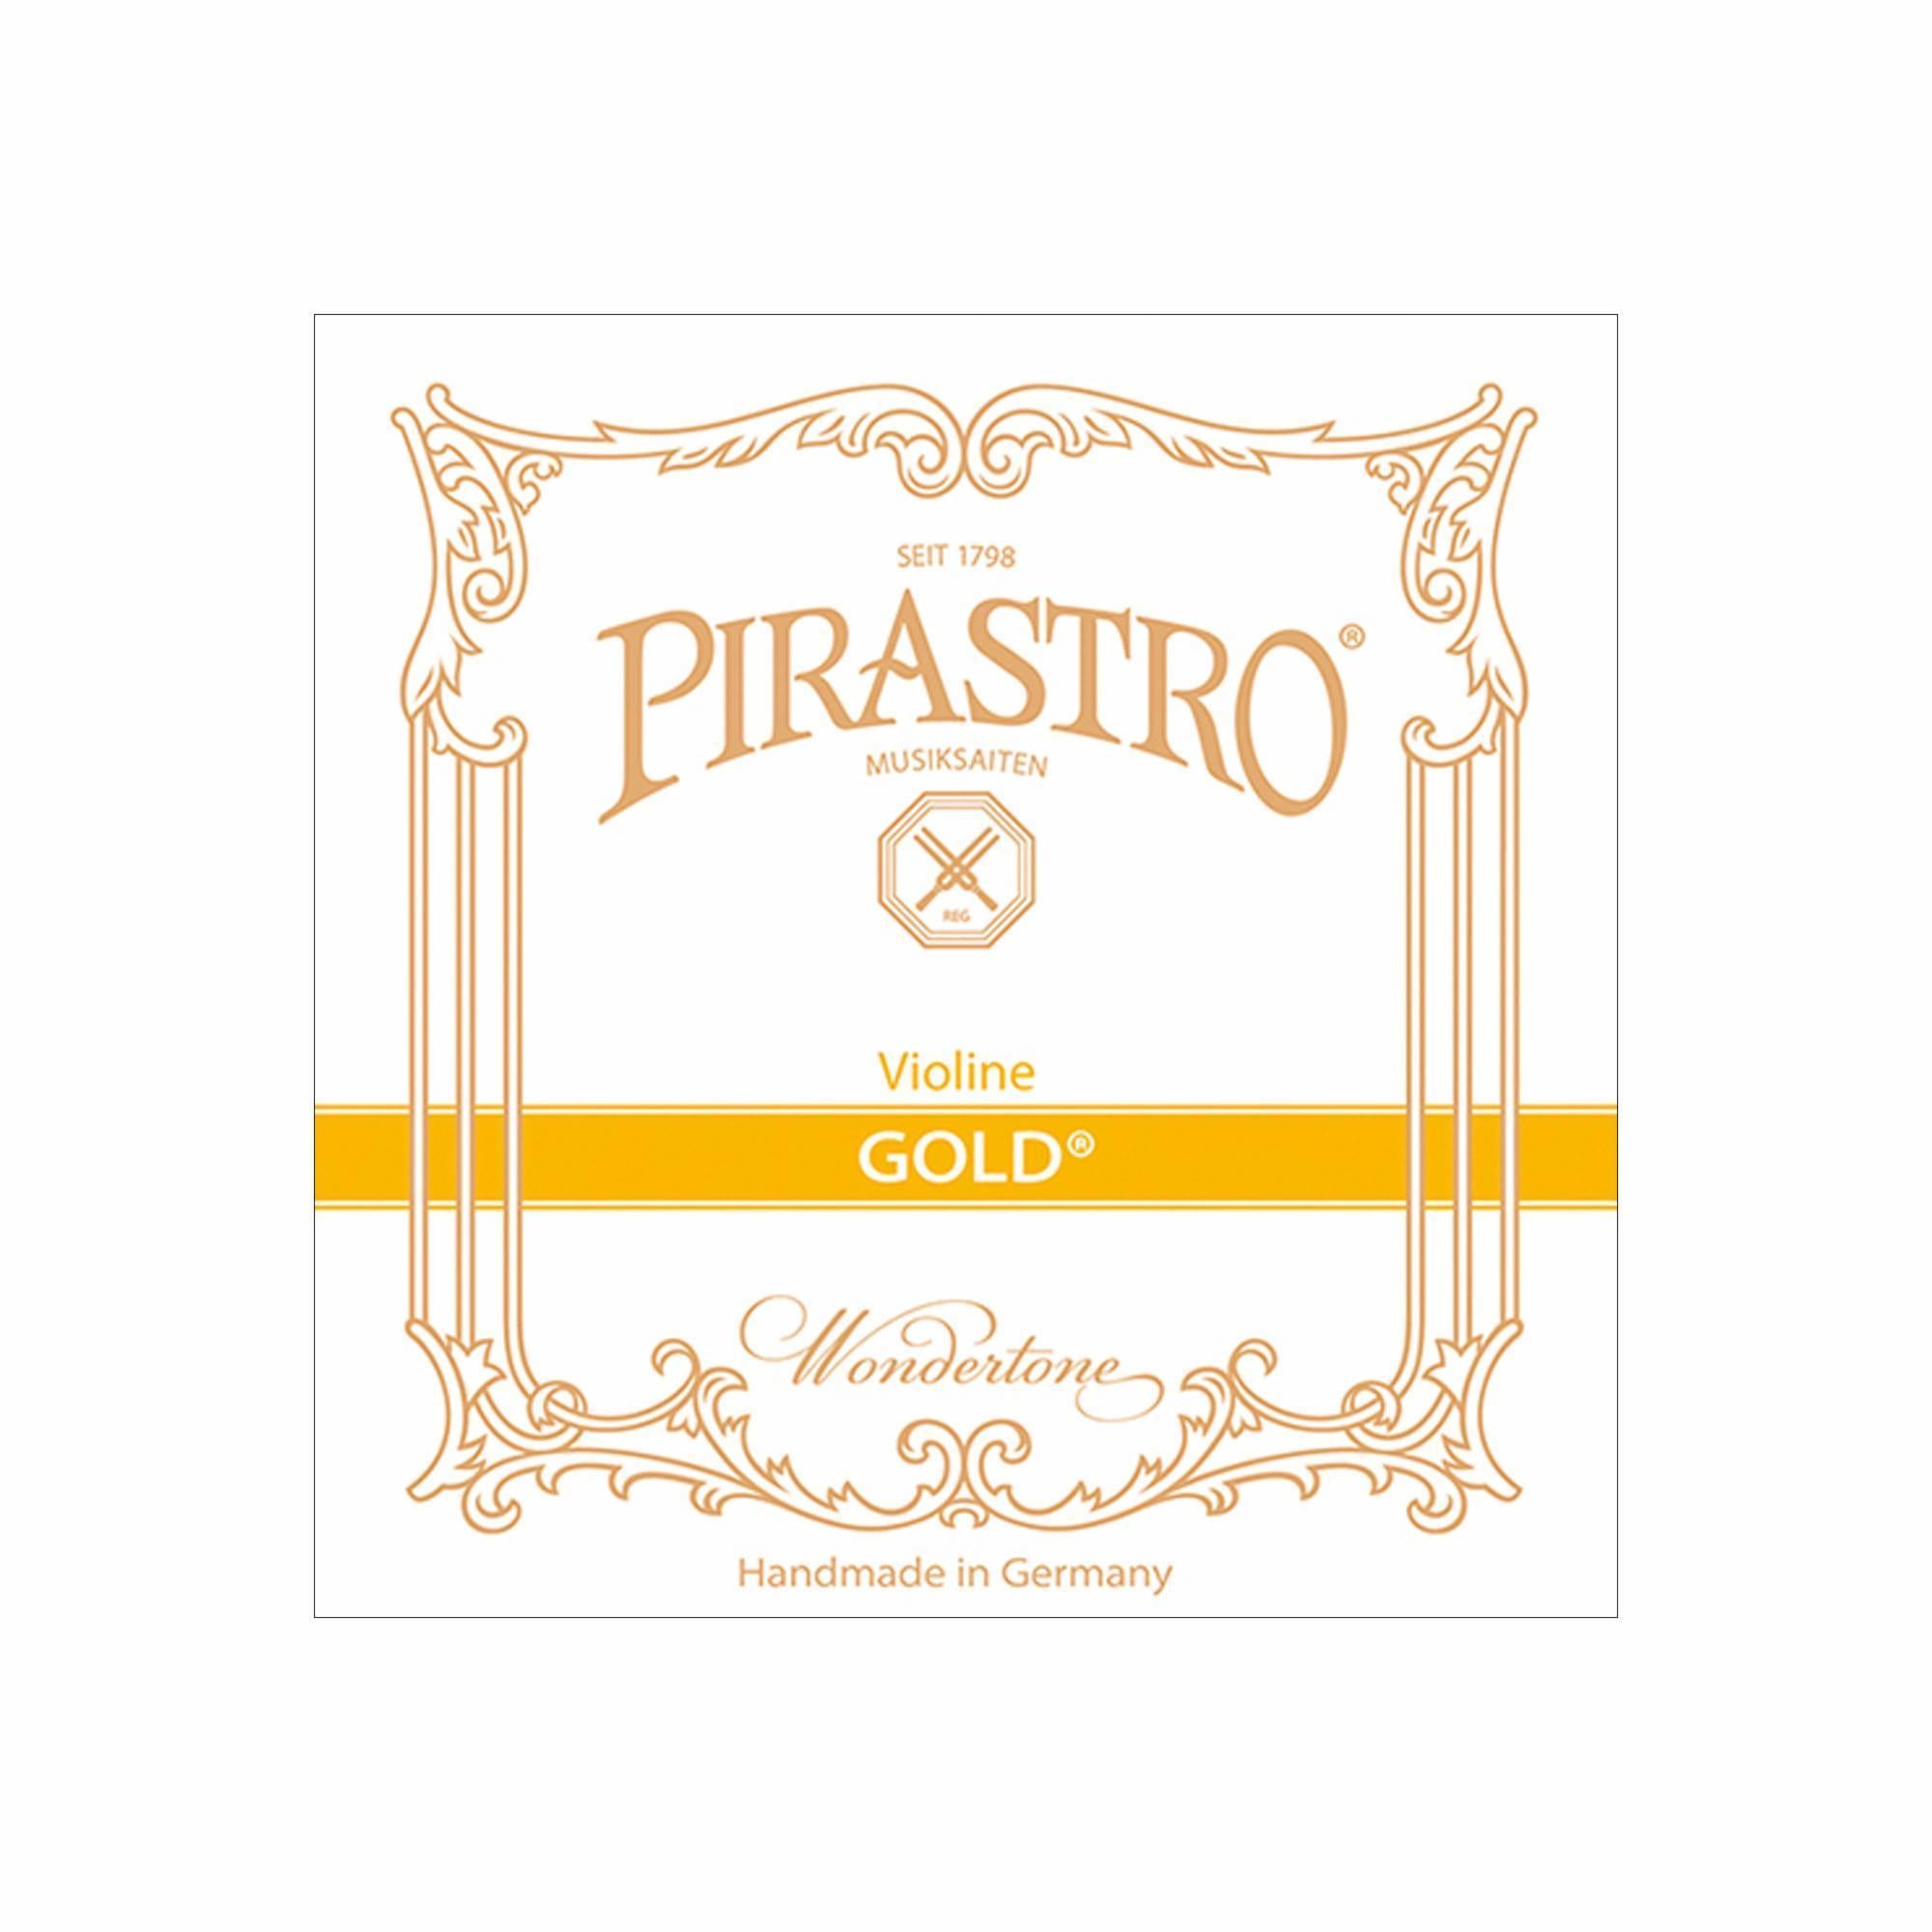 Pirastro Gold Label Violin E String with Loop-Music World Academy